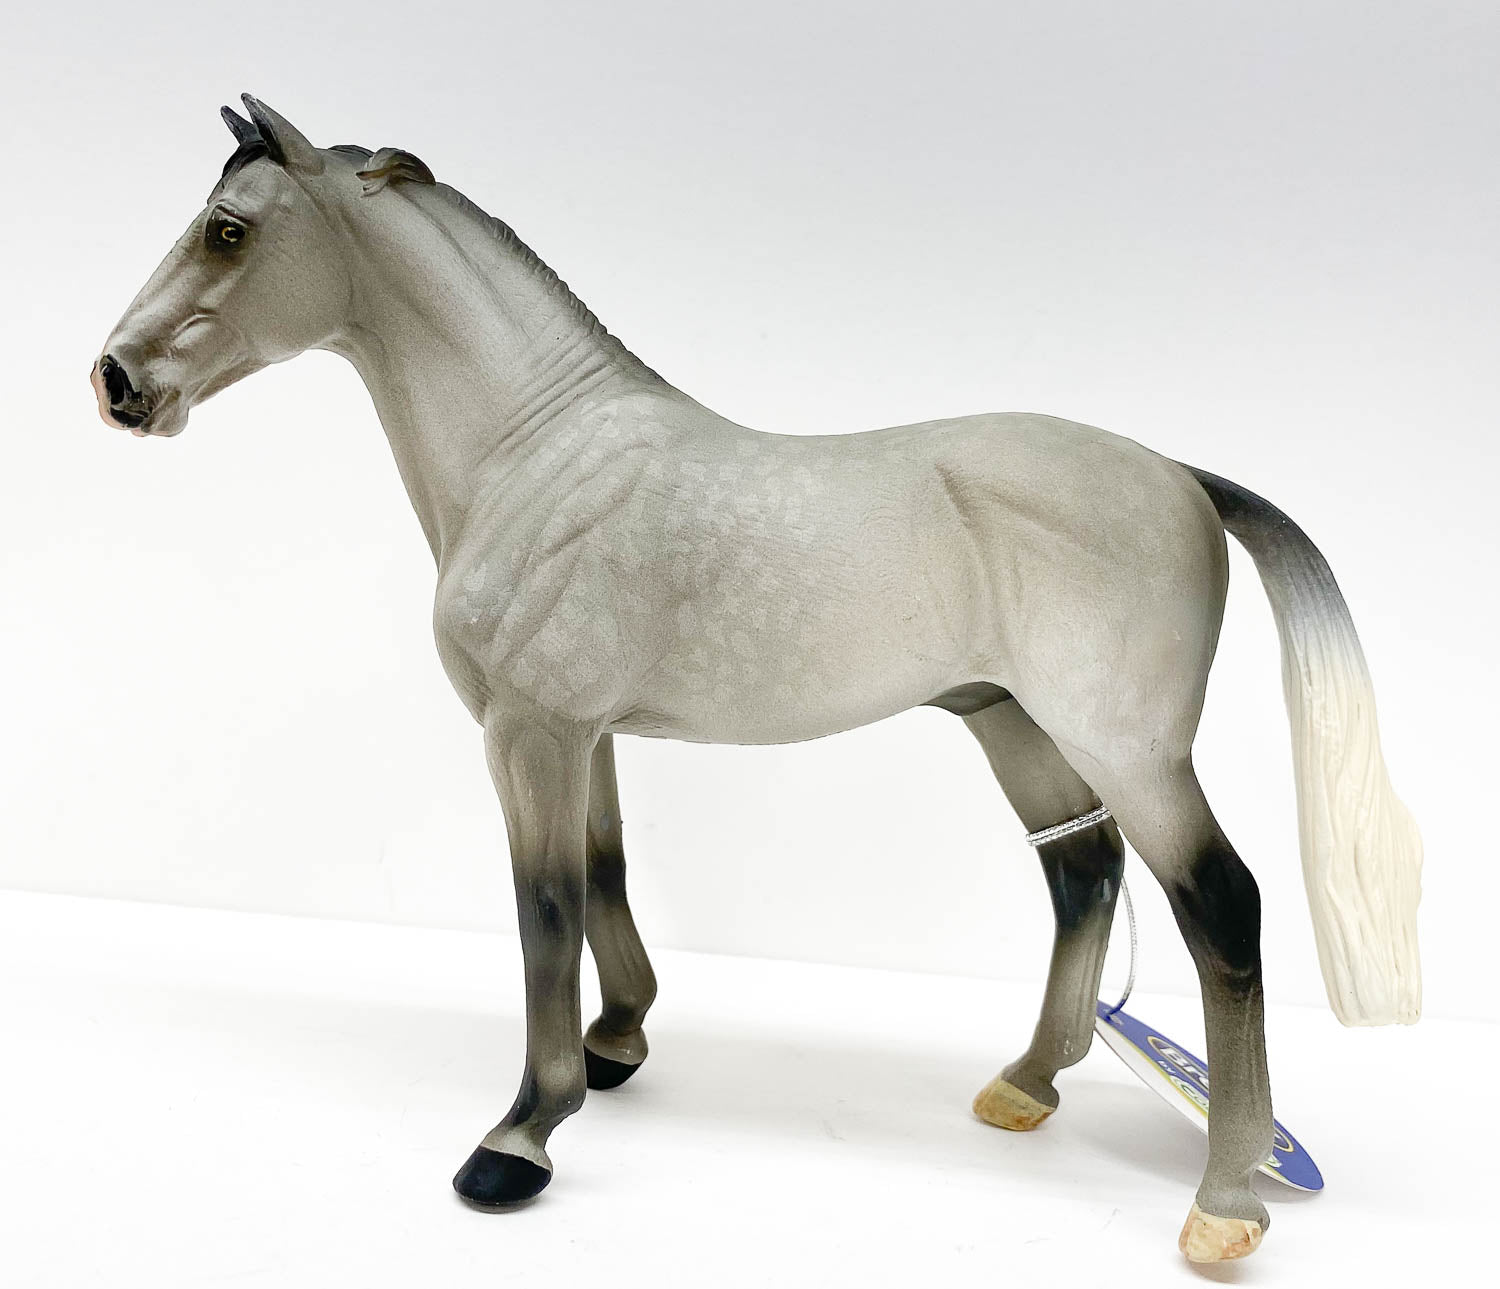 Dapple gray horses: what are they and what their particular